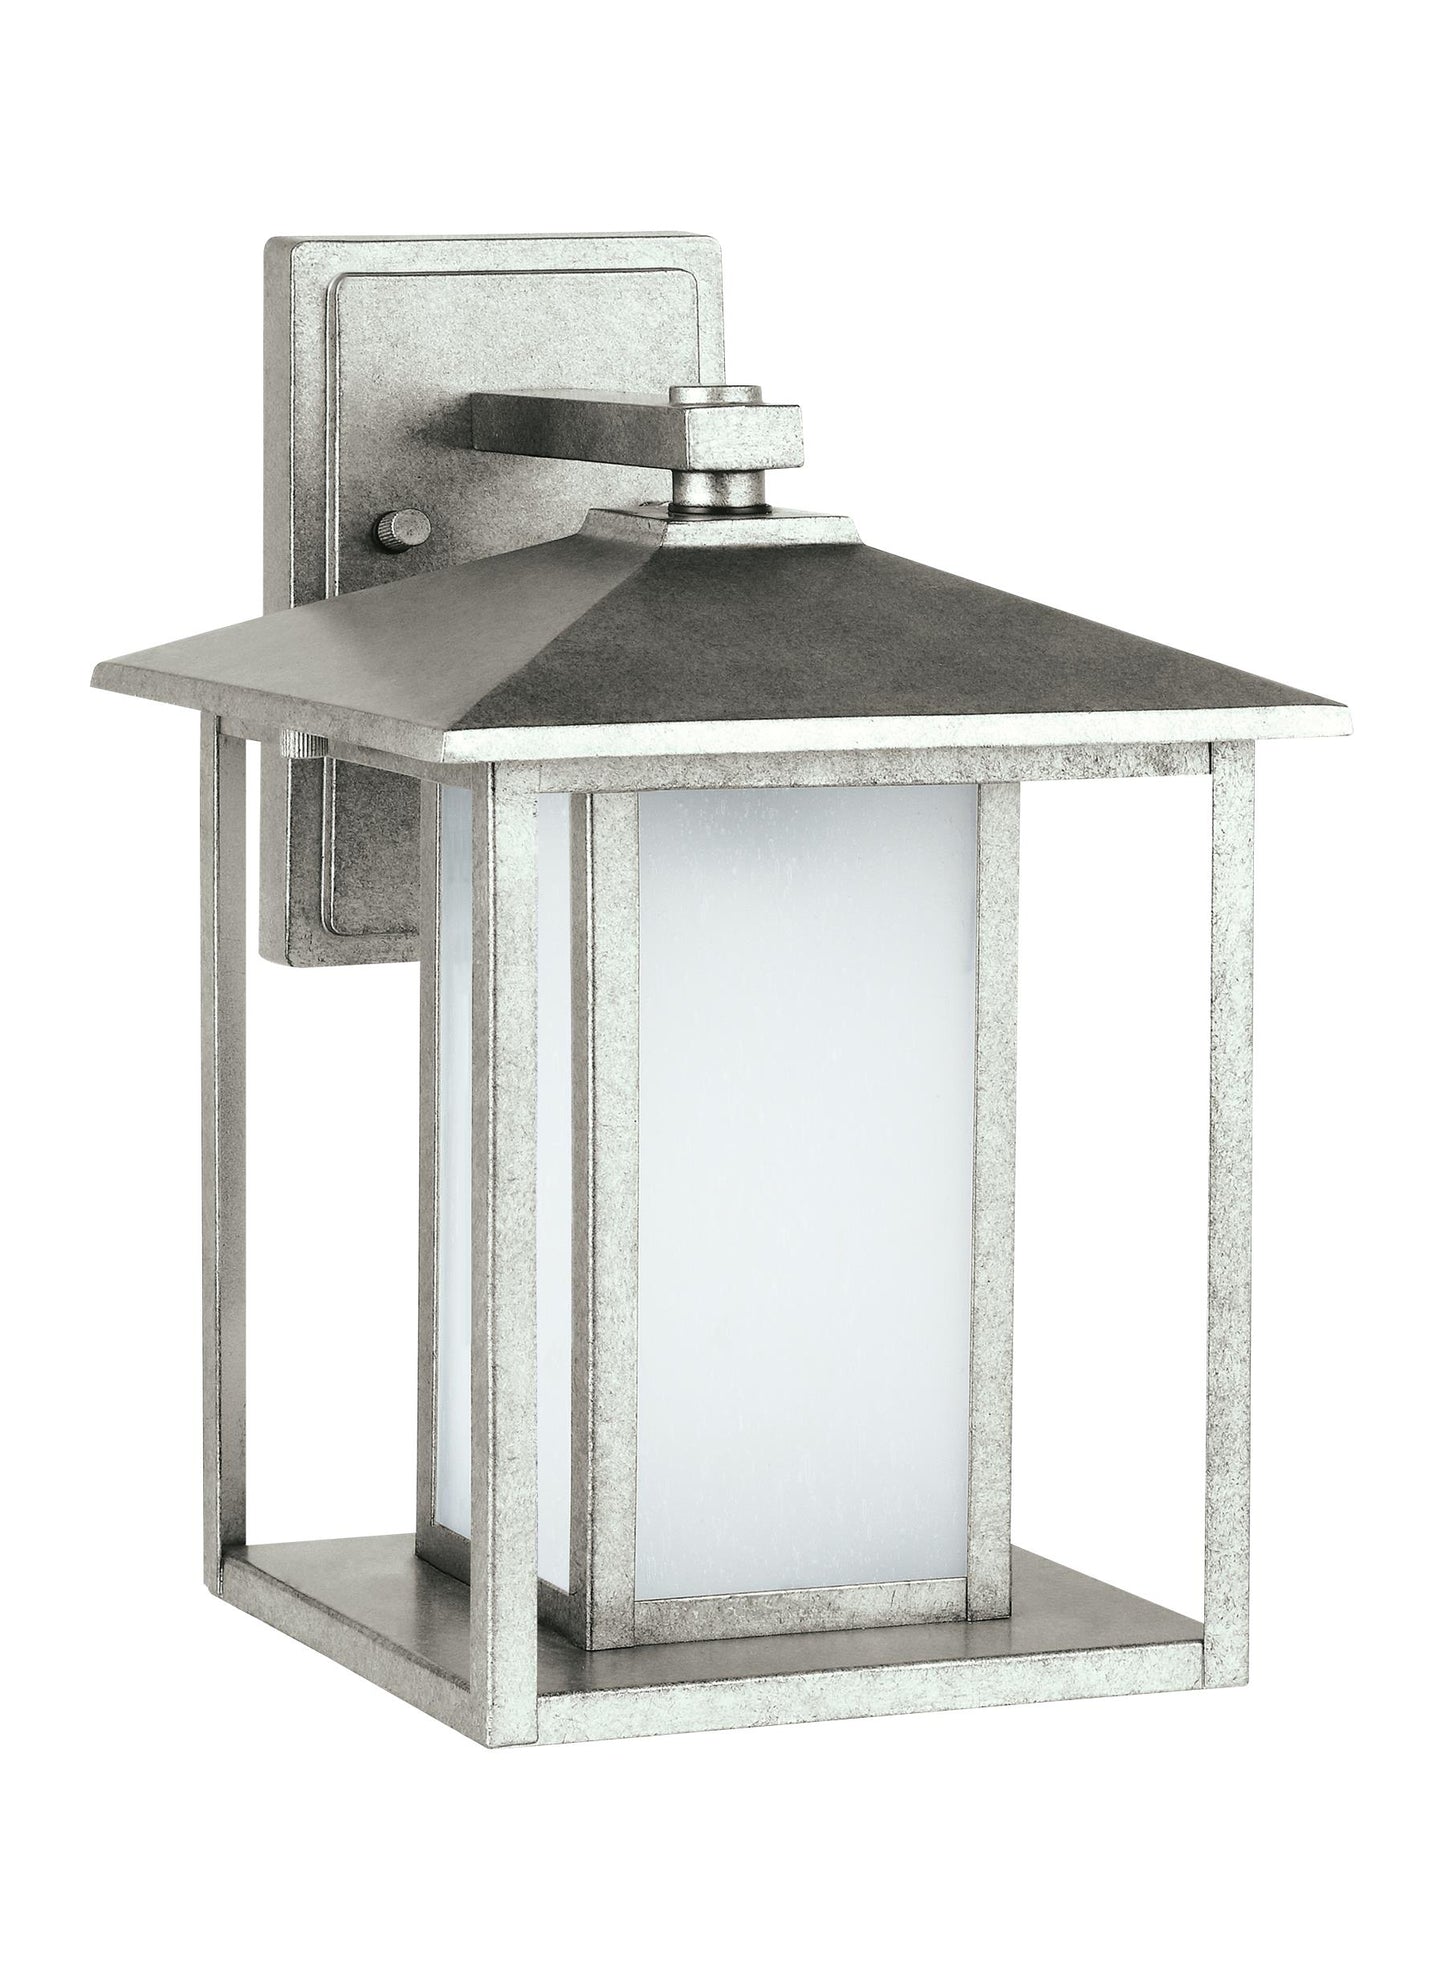 Hunnington contemporary 1-light outdoor exterior medium wall lantern in weathered pewter grey finish with etched seeded gl...